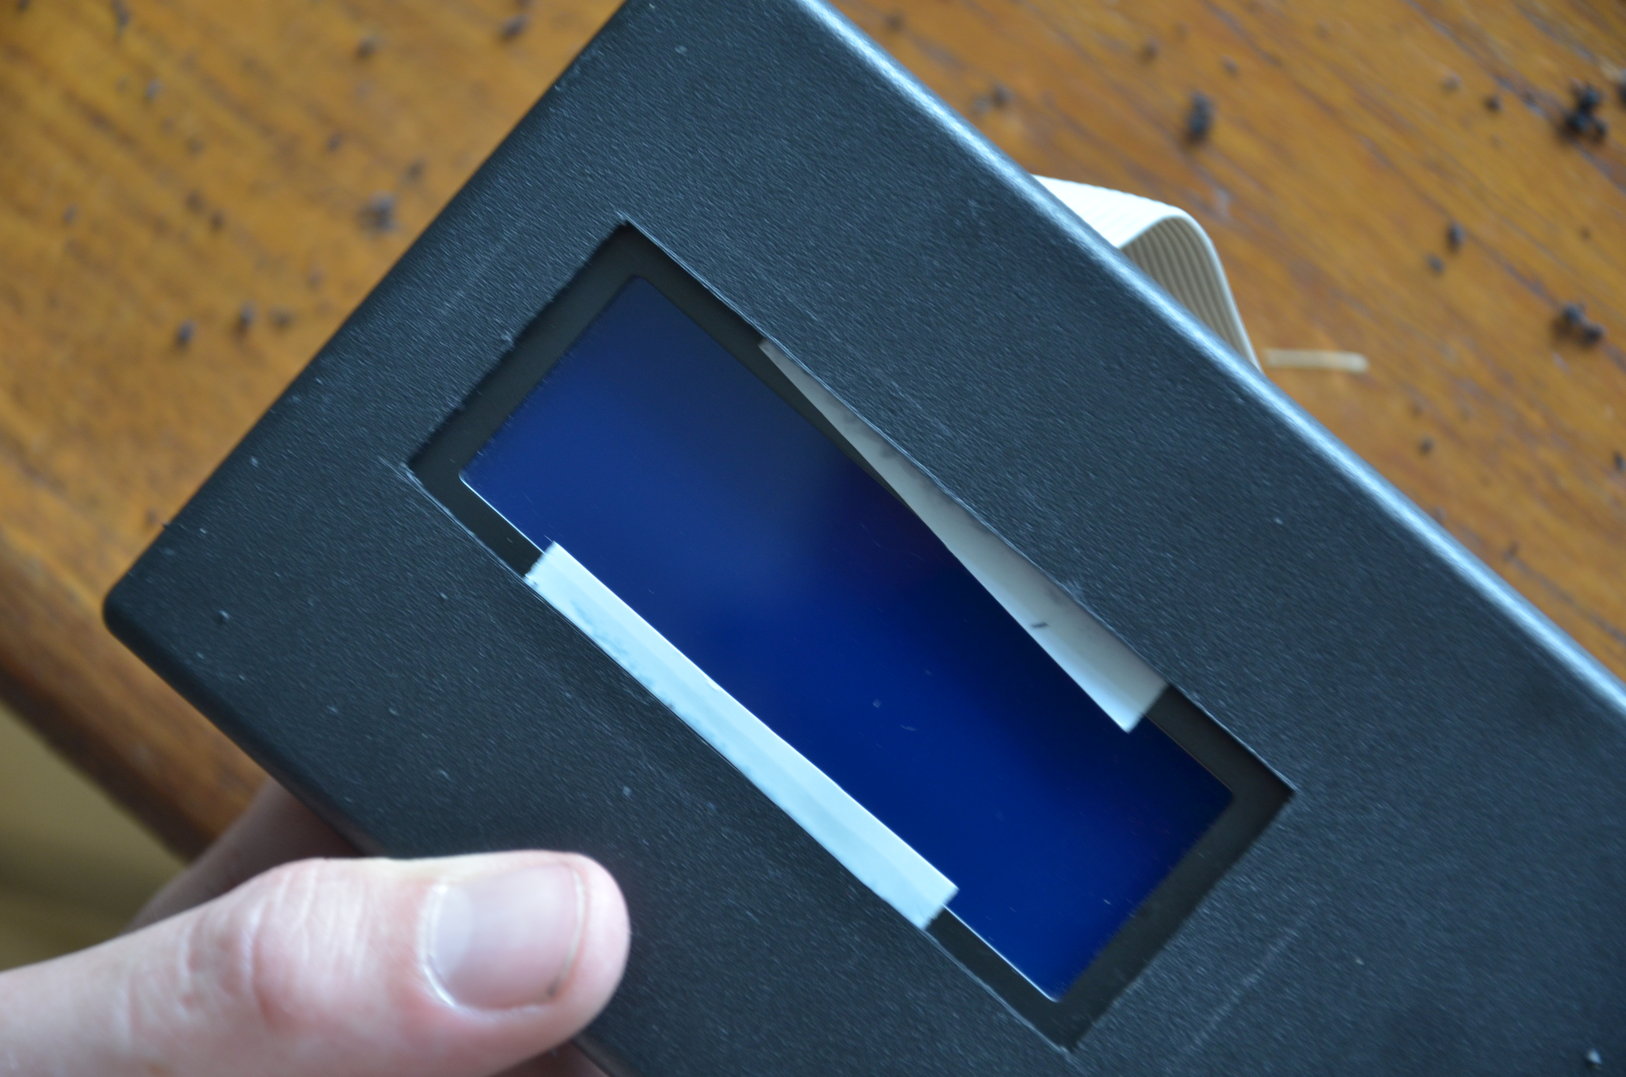 Double adhesive tape was used to hold the display in place while marking where to drill the holes